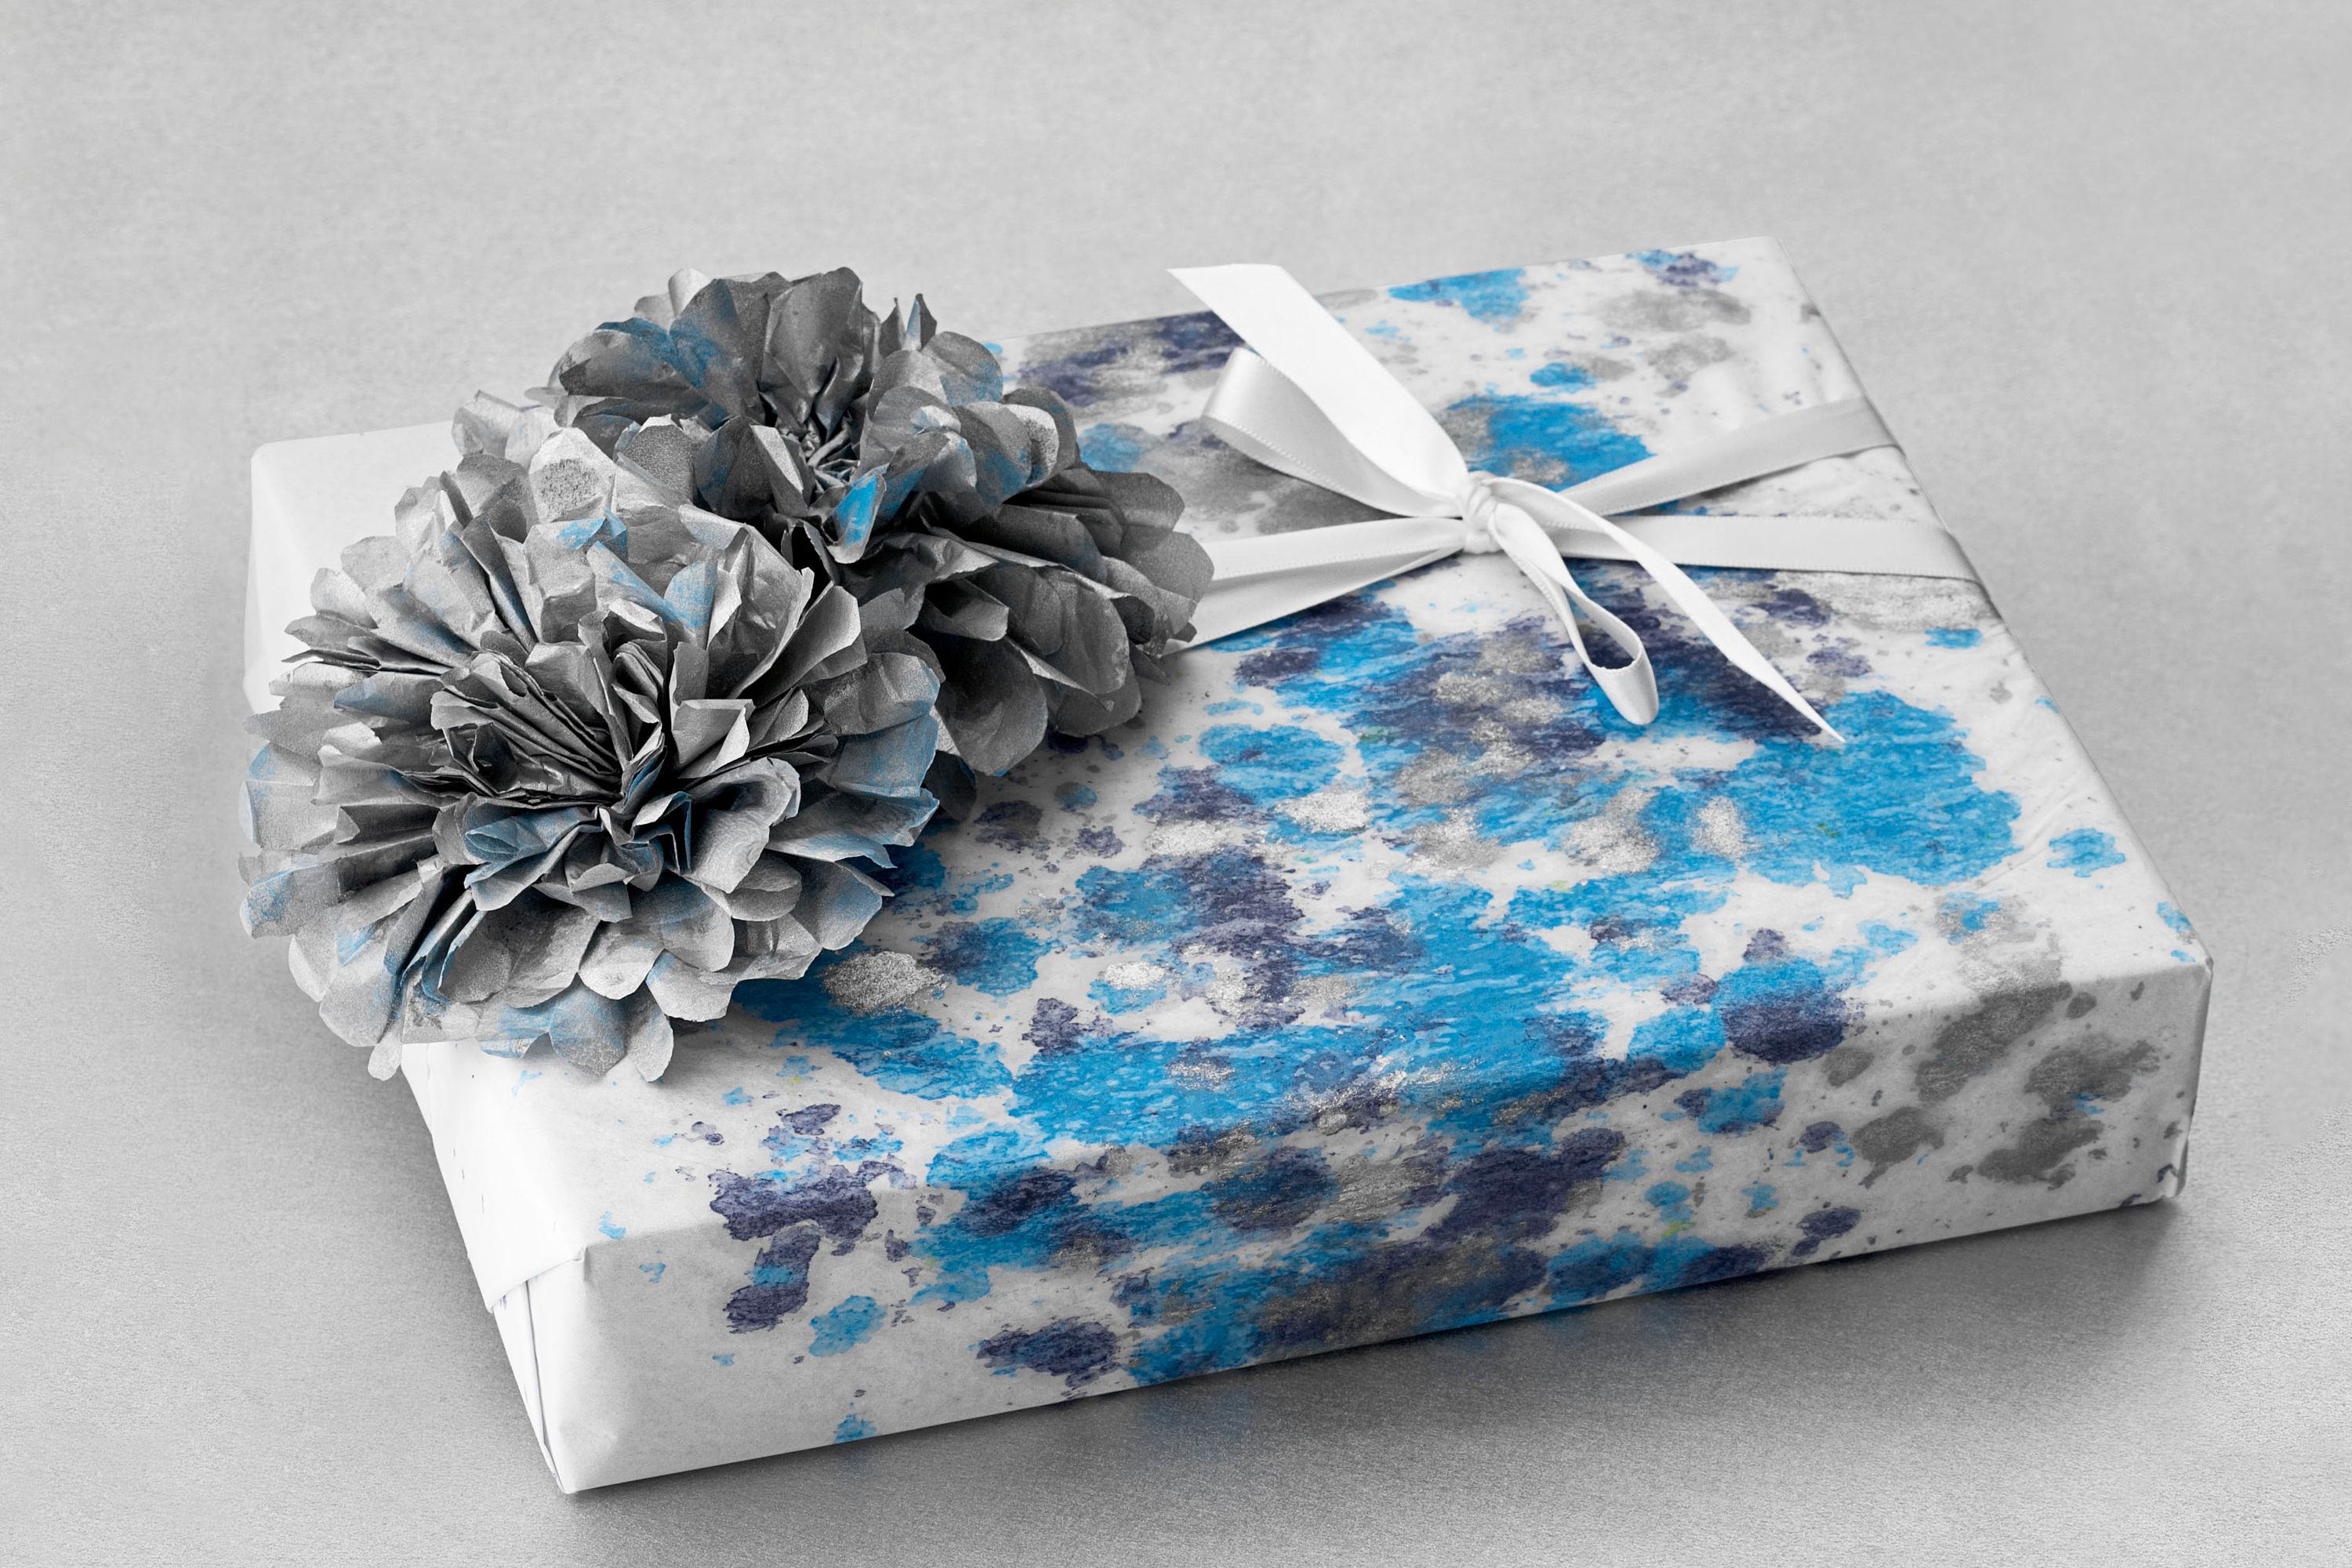 melted crayons could make such a beautiful gift wrapper